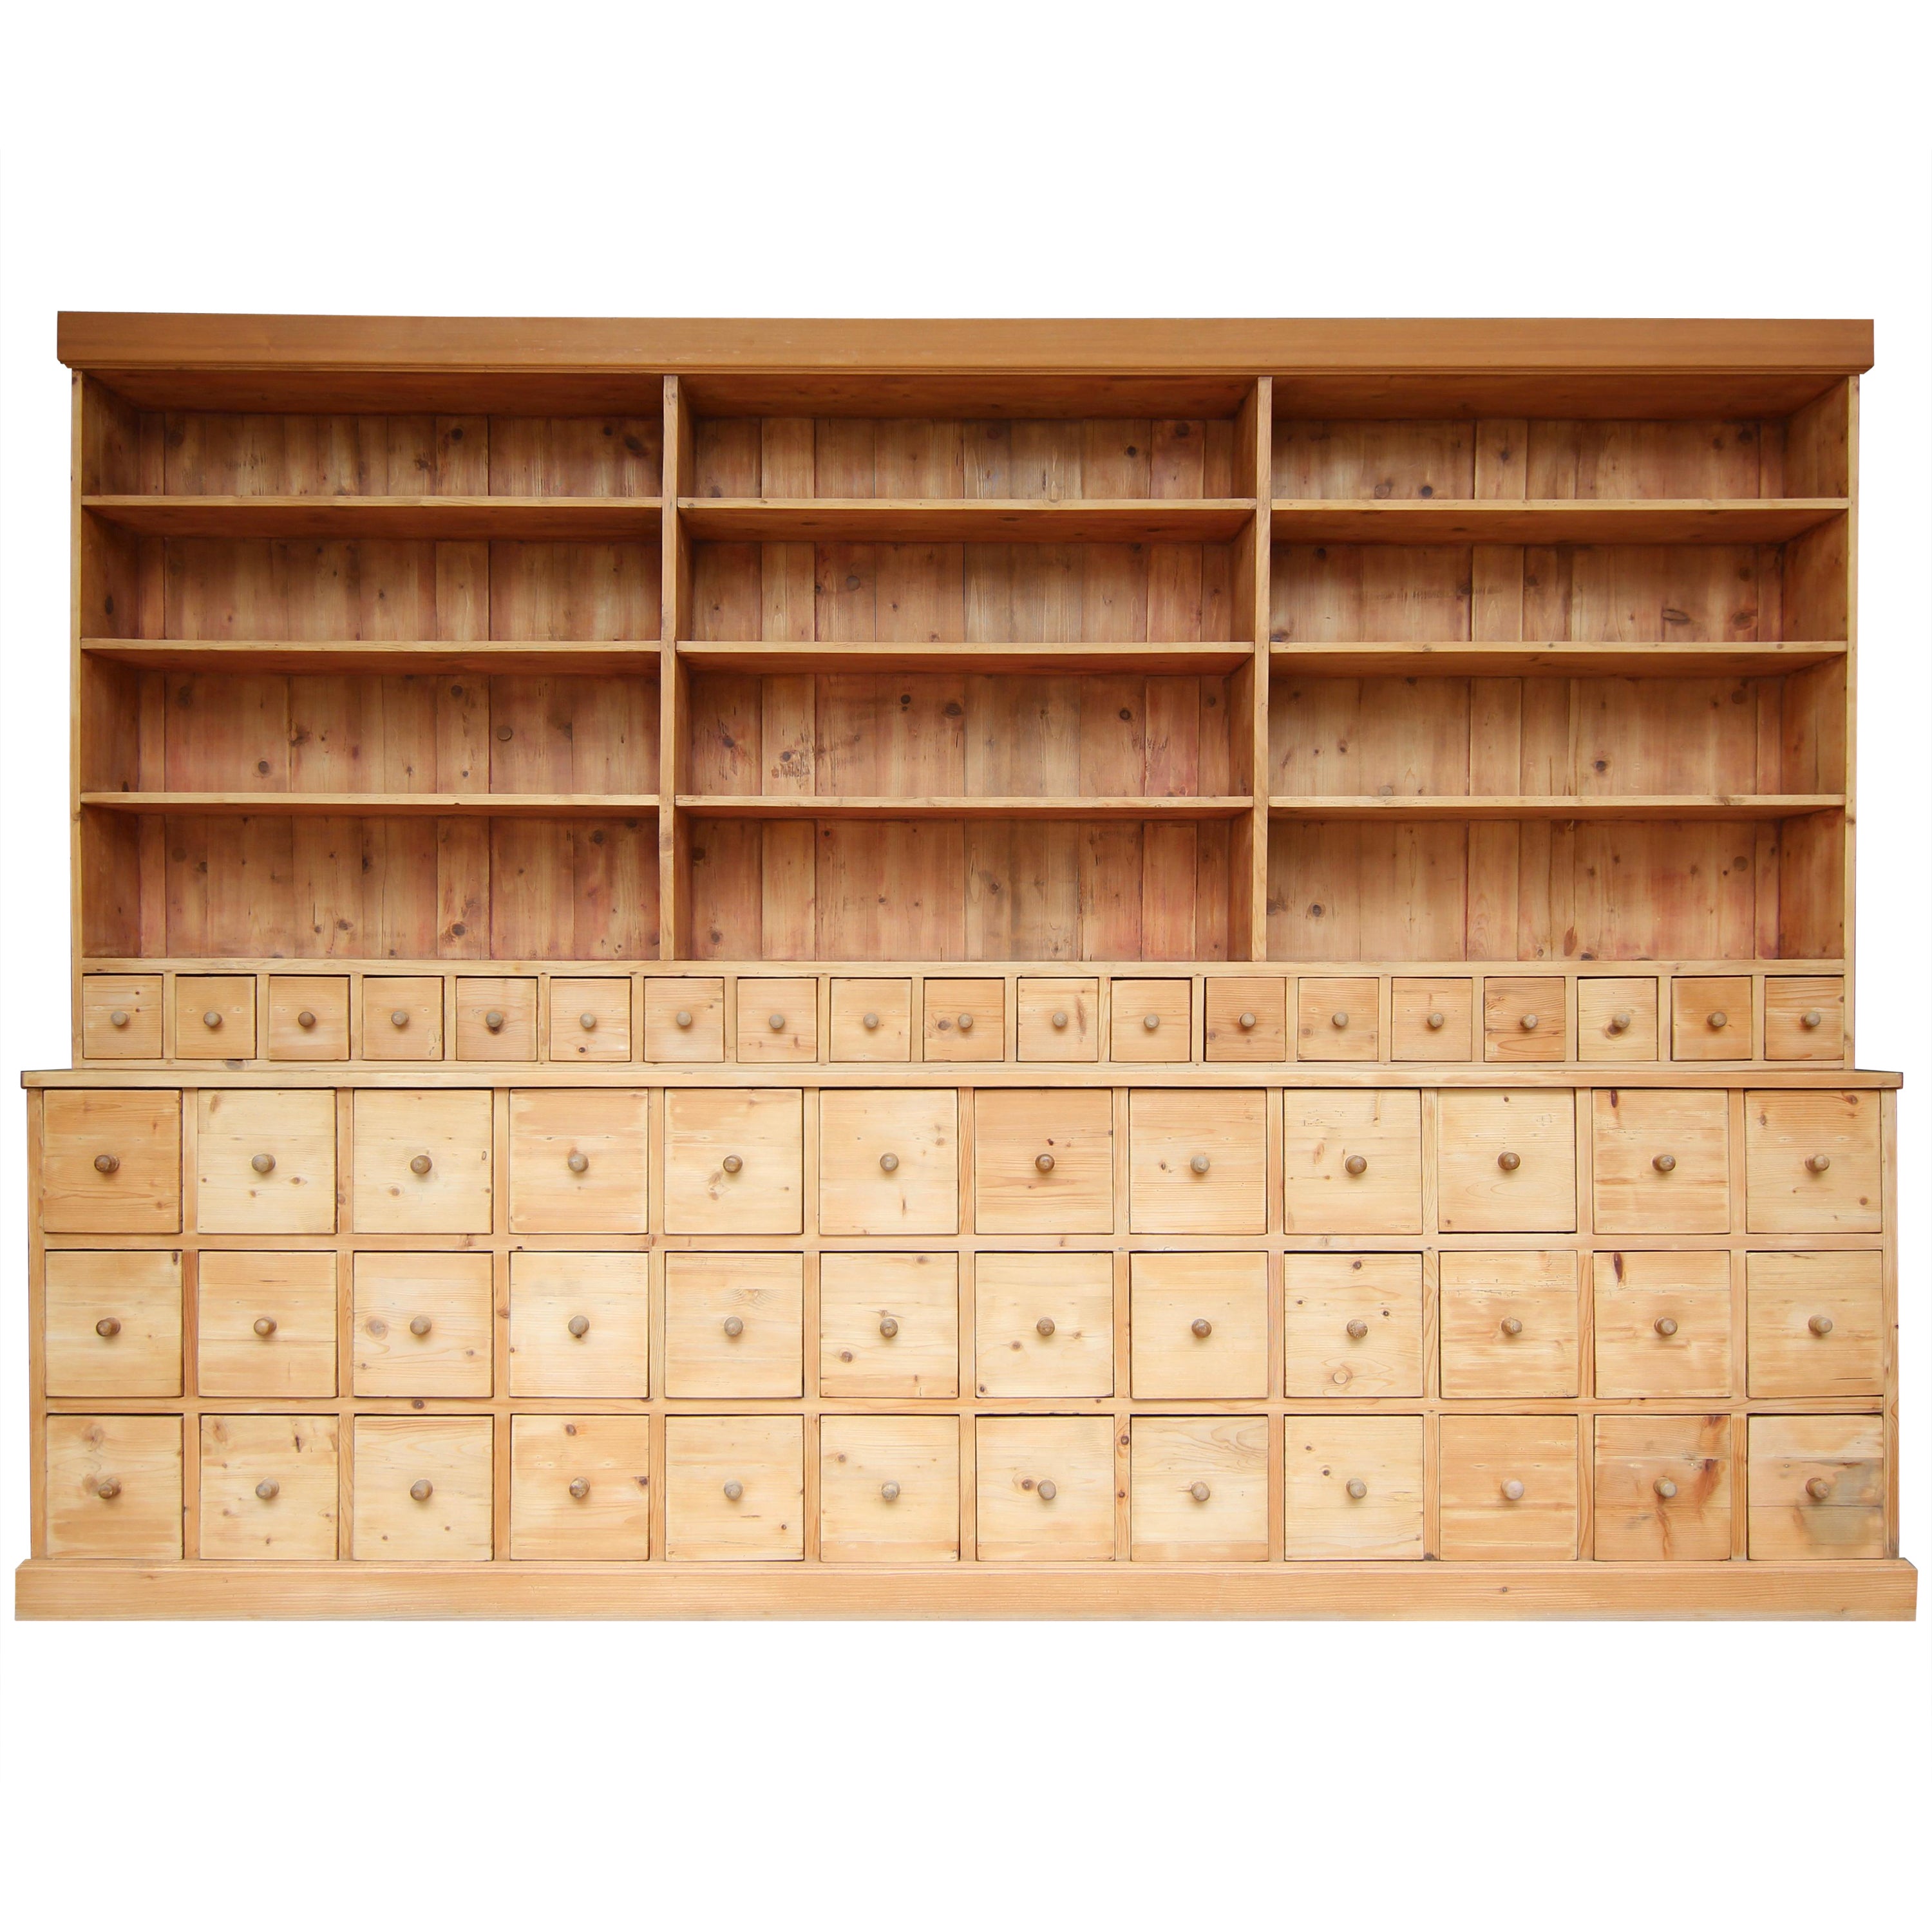 Early 20th Century Pine Apothecary Cabinet For Sale